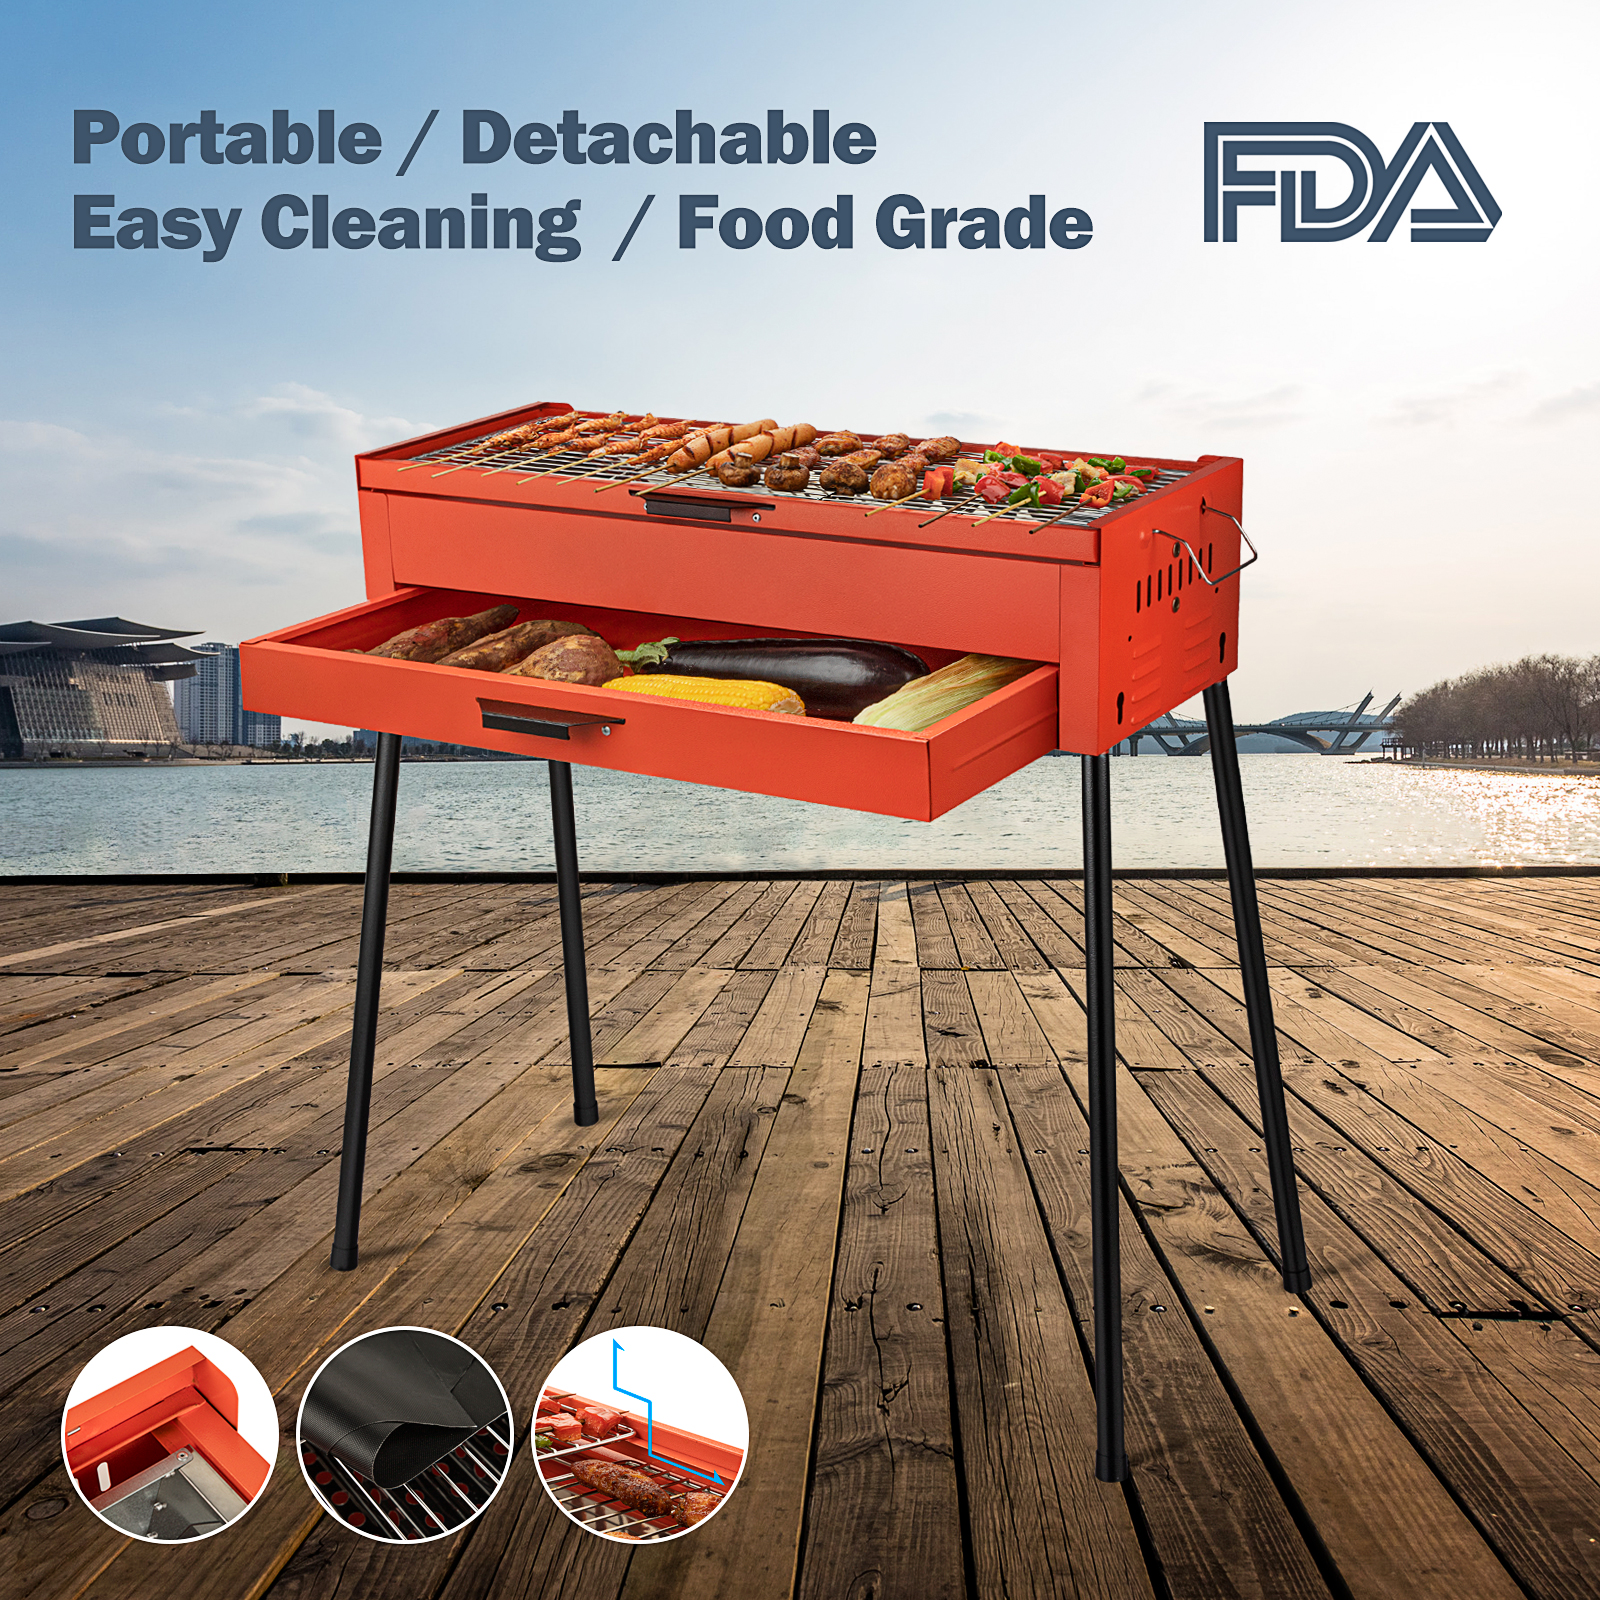 Portable Stainless Steel Charcoal Barbecue BBQ Grill Portable Outdoor Camping Picnic Smoker 85x28x77cm